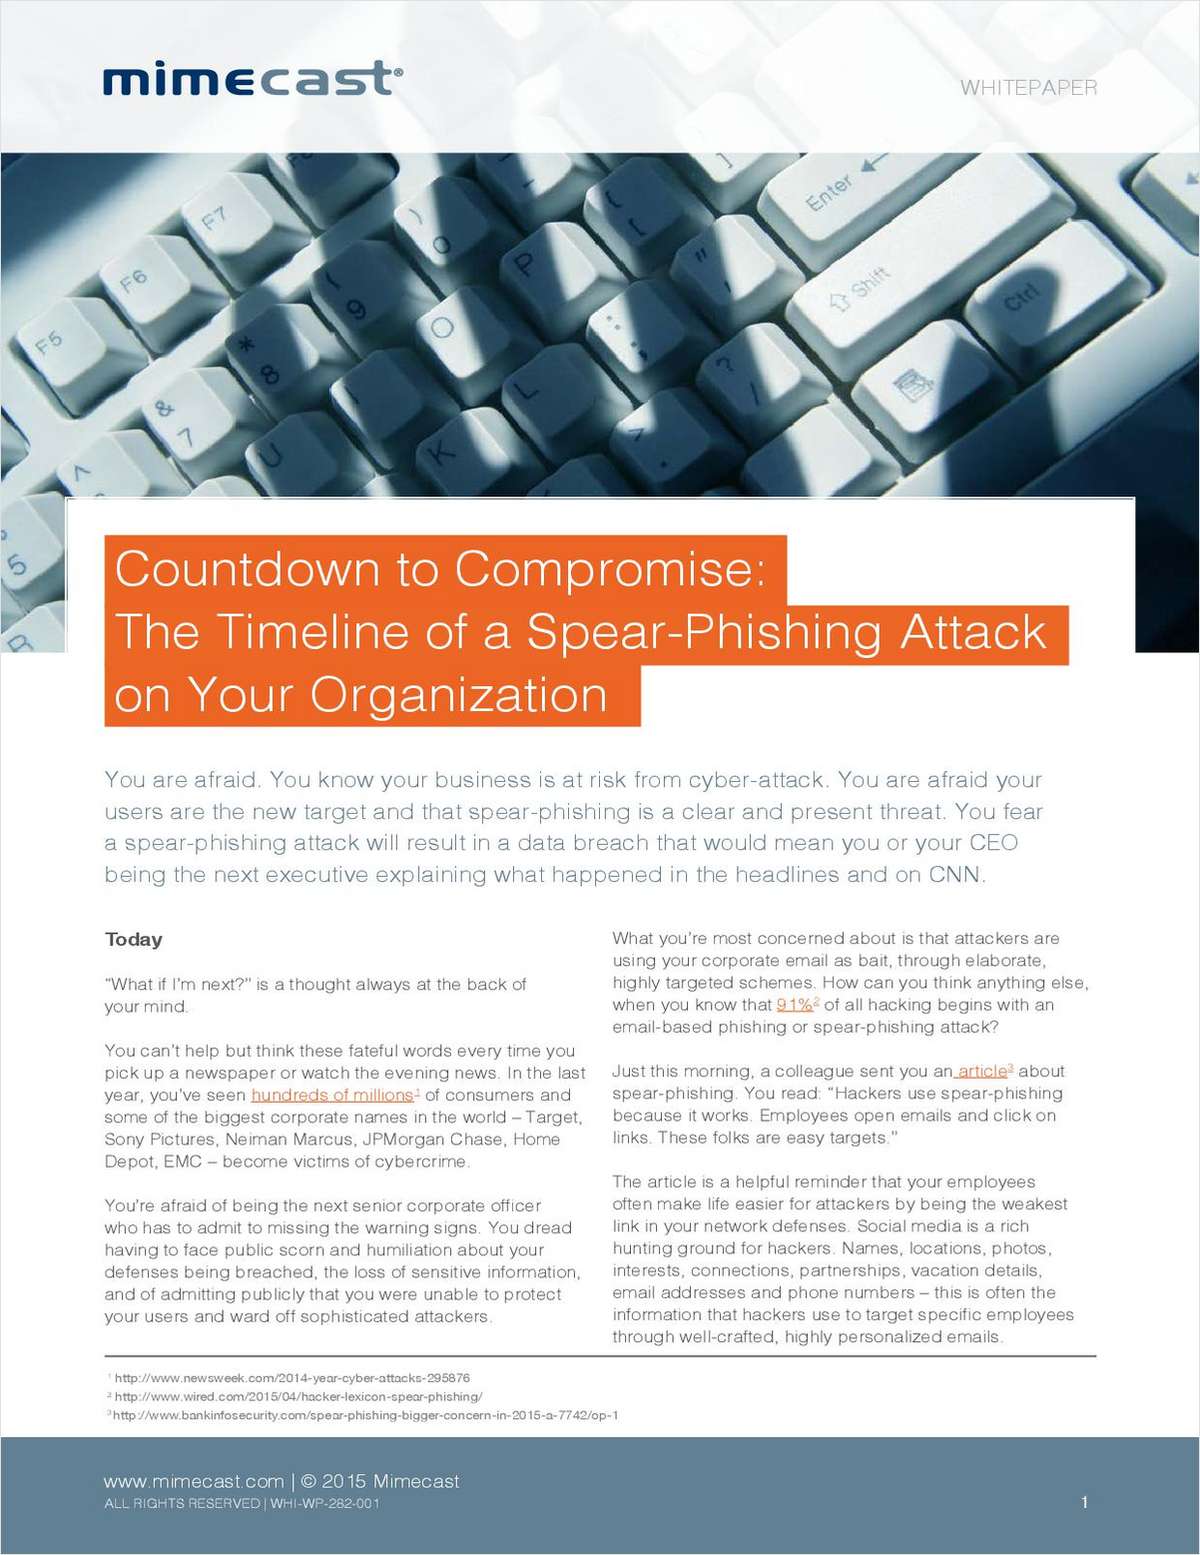 Countdown to Compromise: The Timeline of a Spear-Phishing Attack on Your Organization